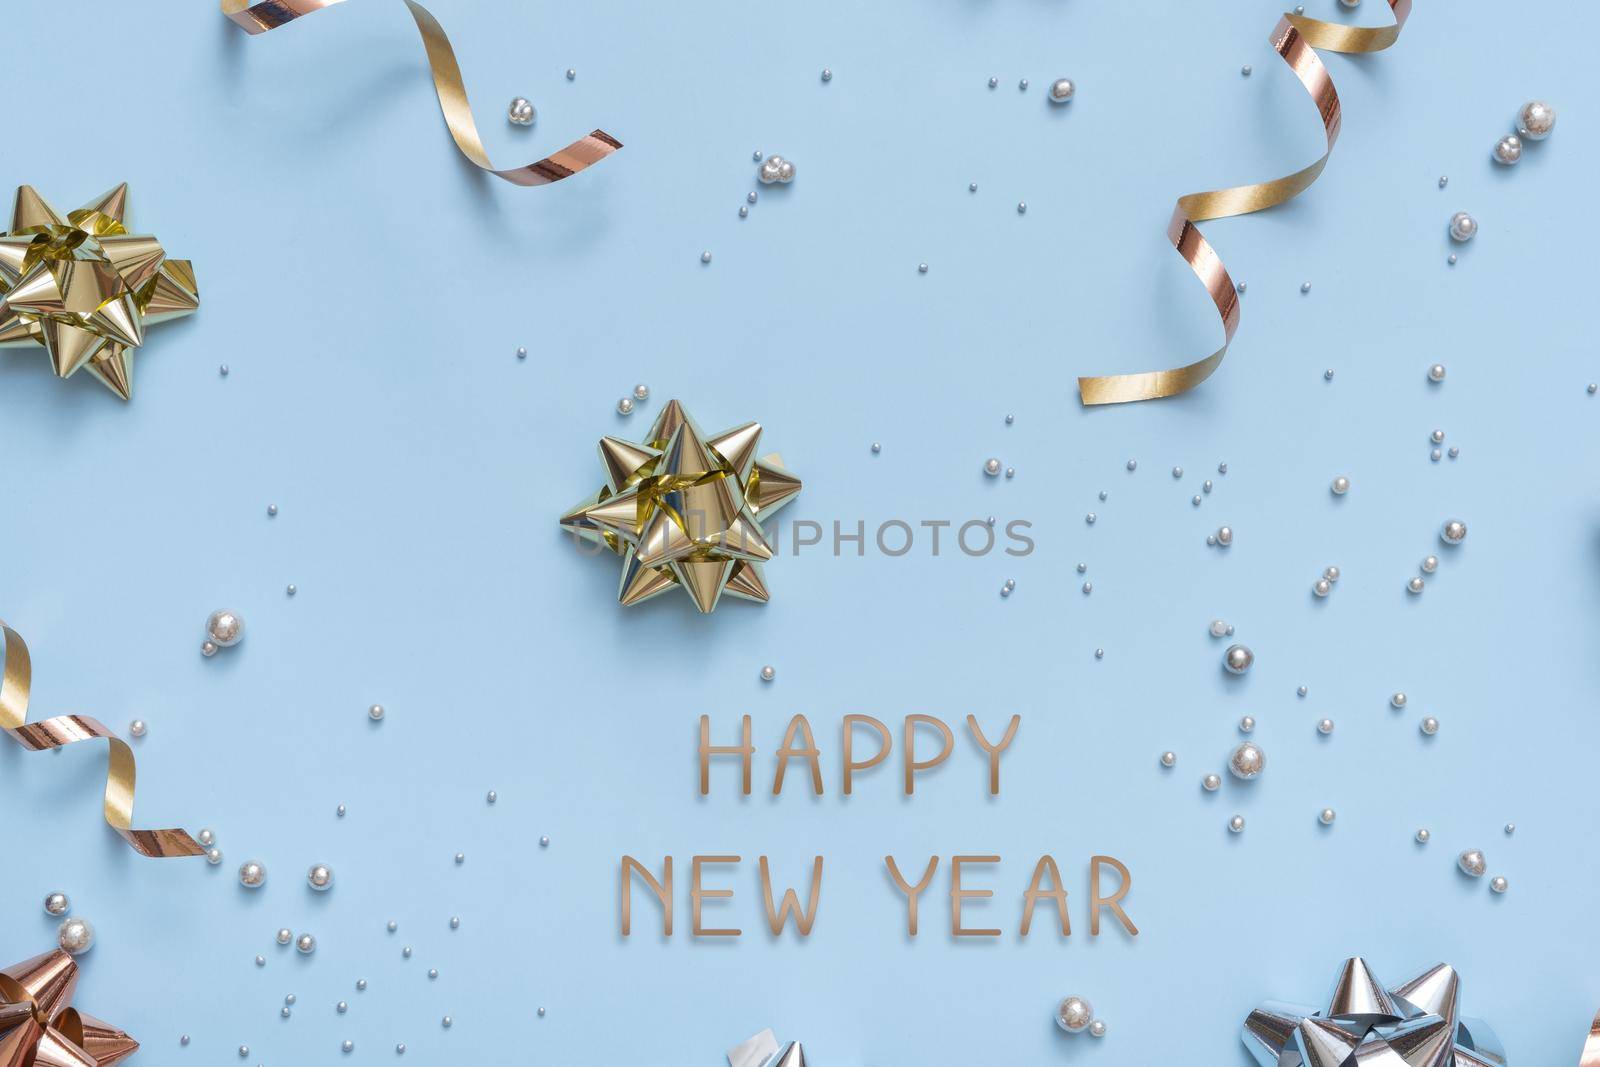 Happy new year text on bright festive background with bows and beads top view. New Year greeting background flat lay.